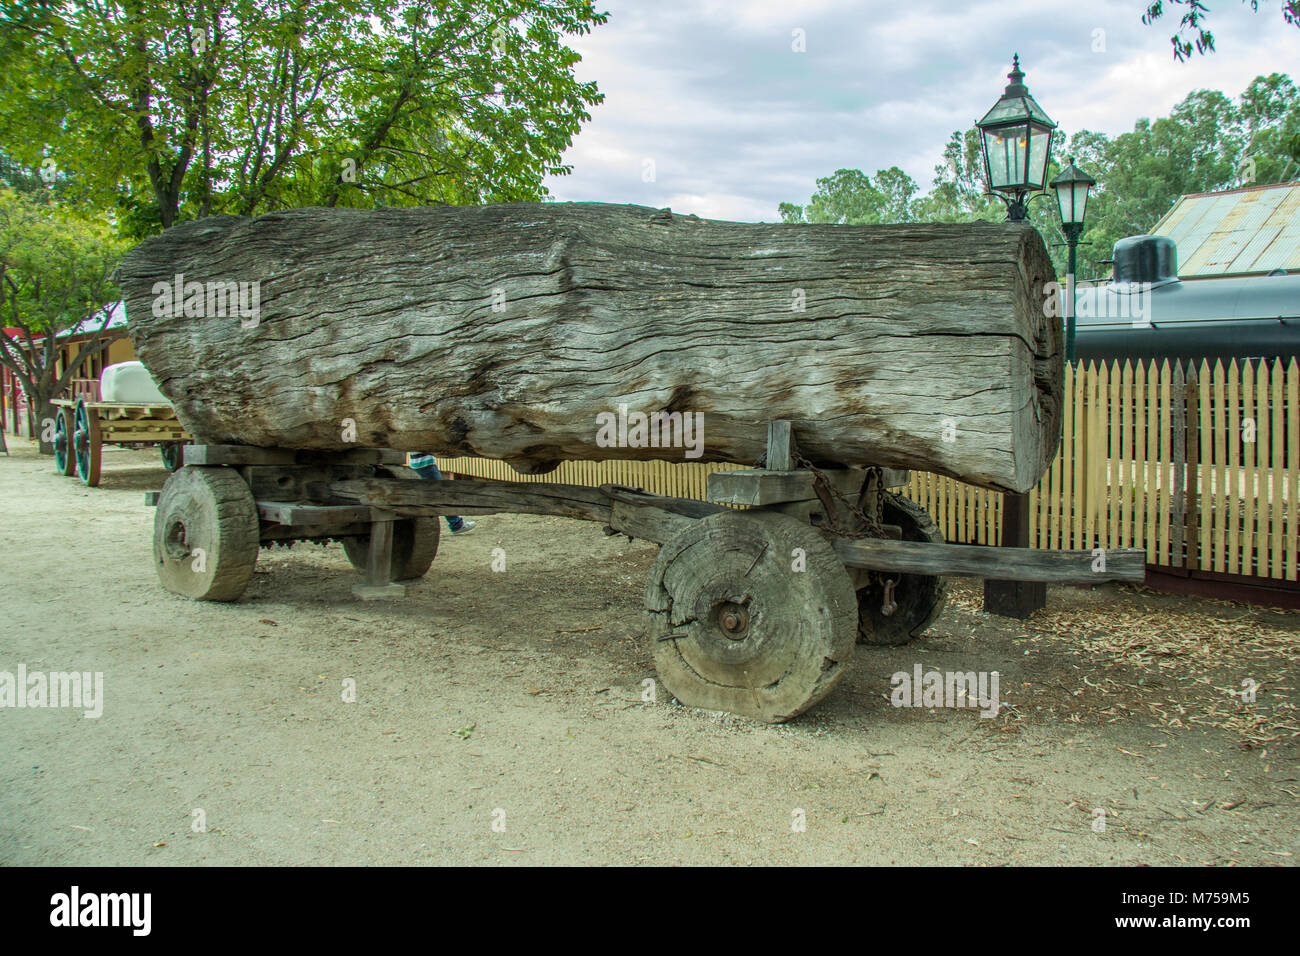 Log on old truck with wooden wheels, Echuca, Victoria, Australia Stock Photo